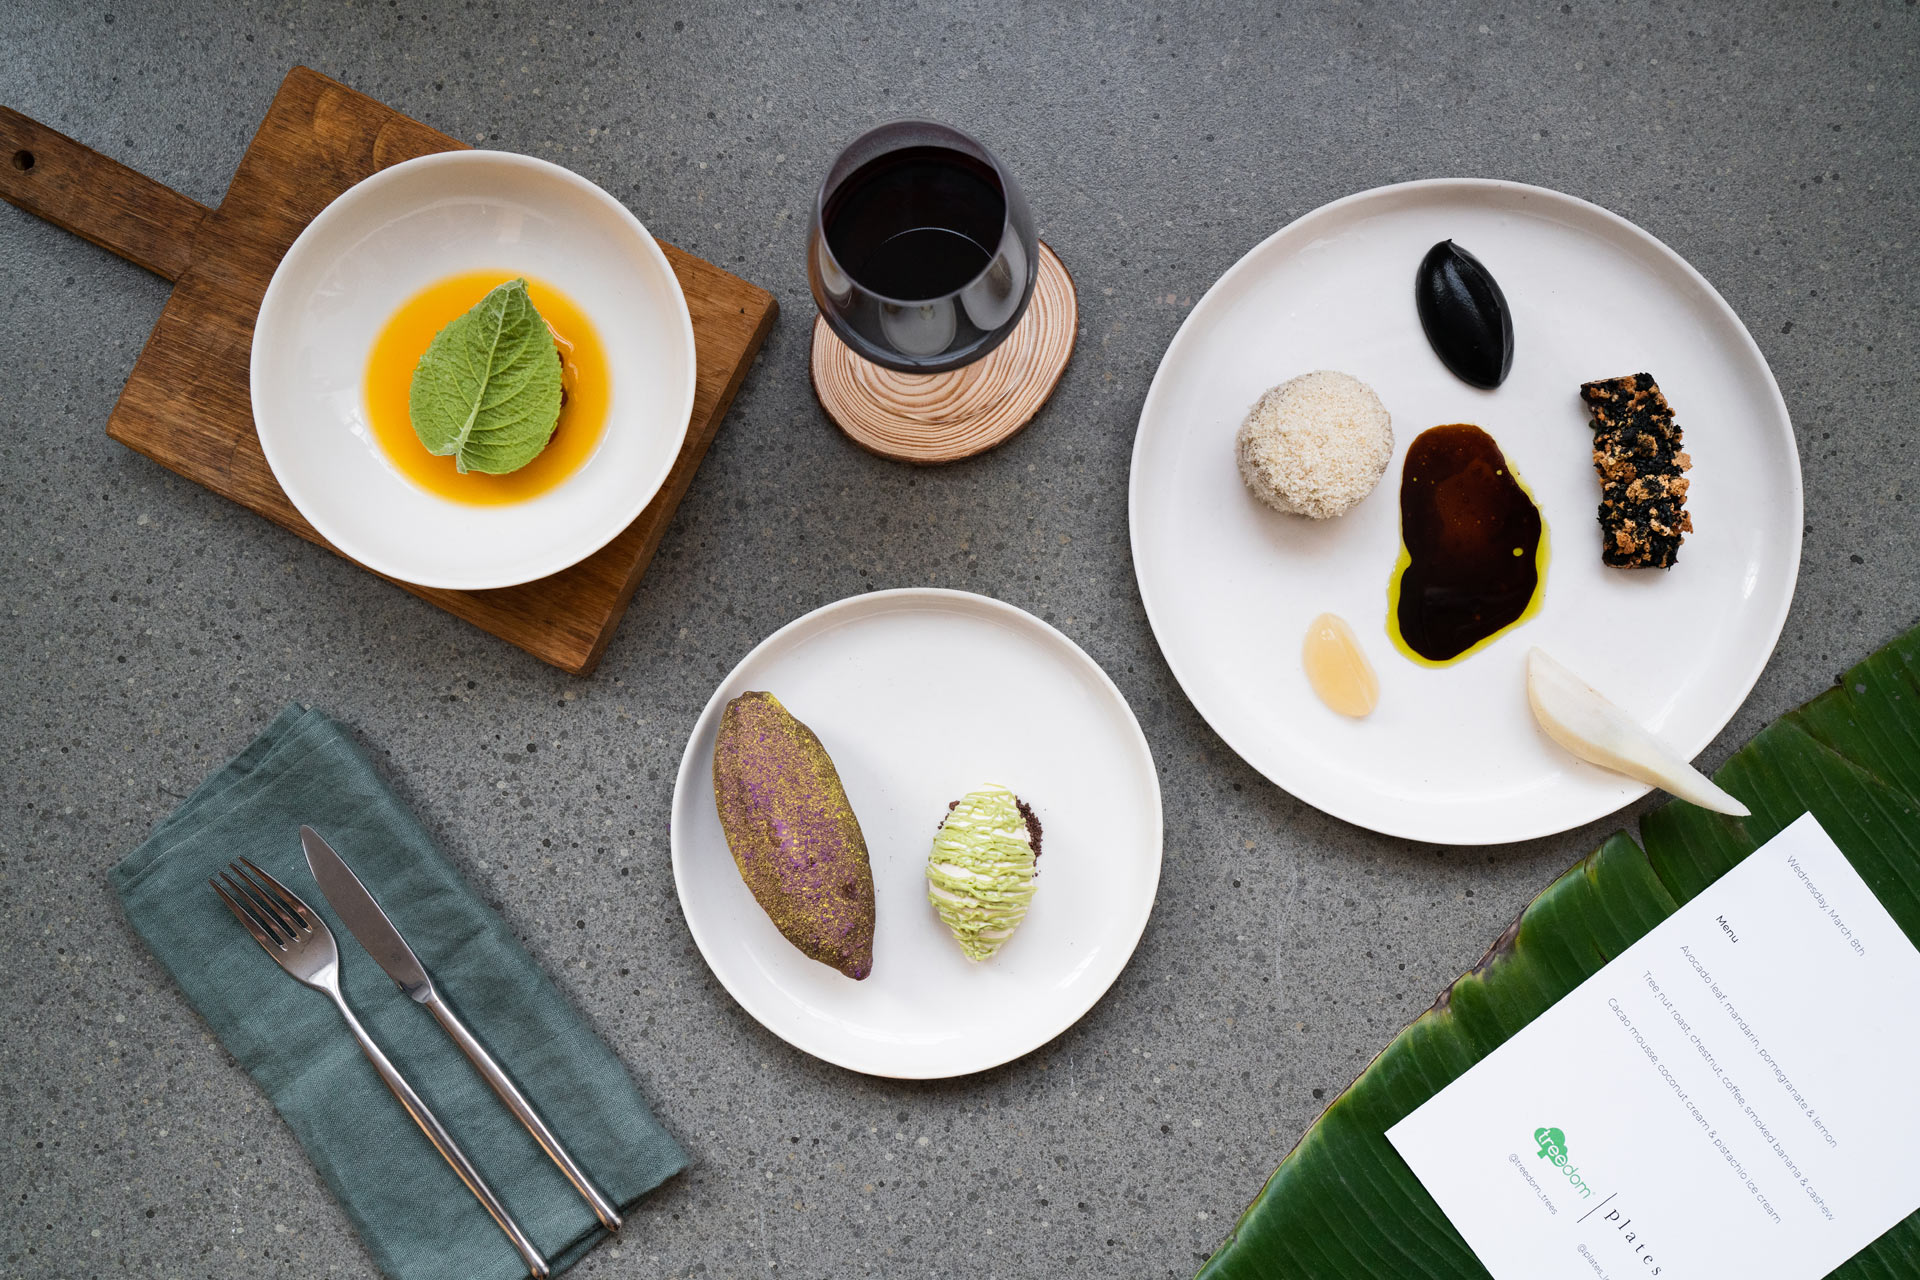 A three-course menu of dishes created from trees